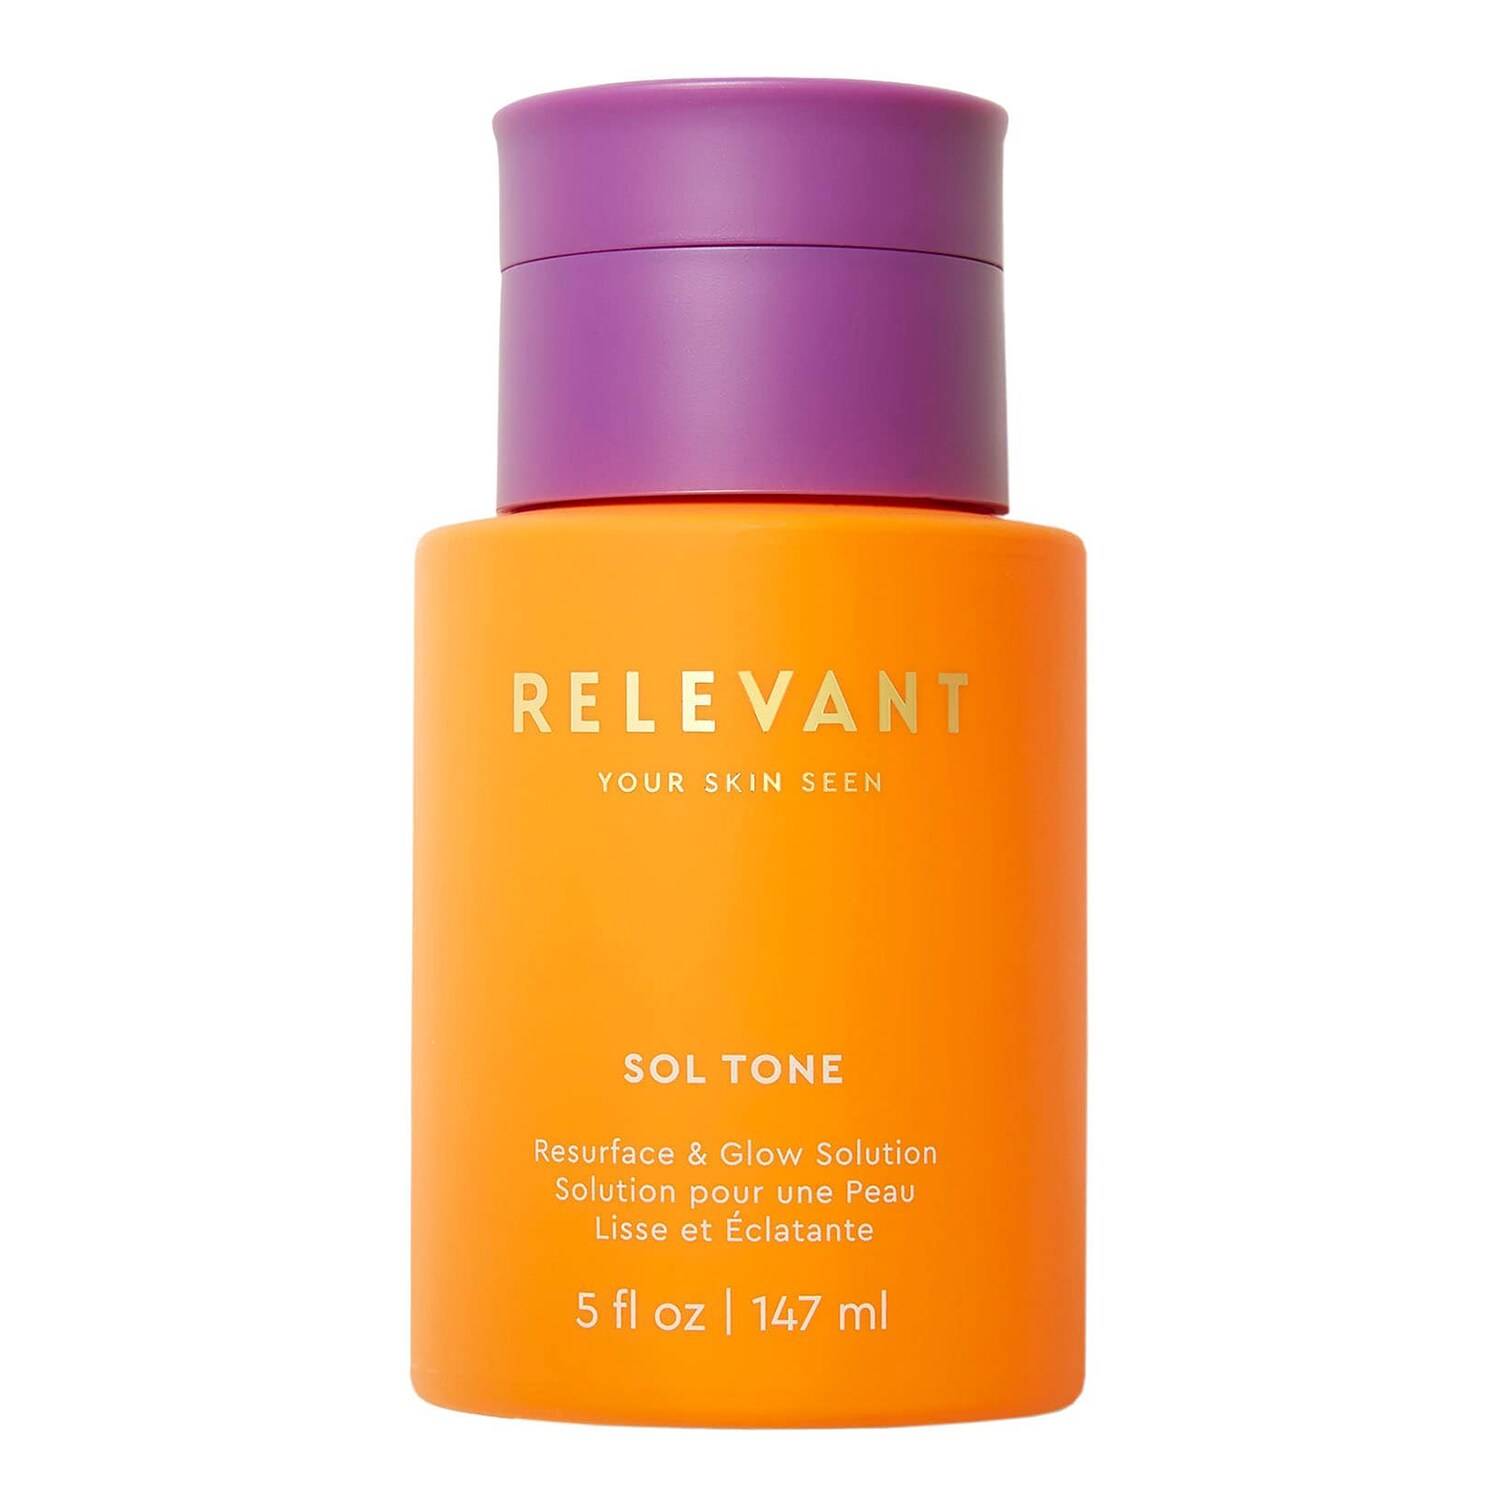 Relevant Your Skin Seen Sol Tone Resurface & Glow Solution 147Ml